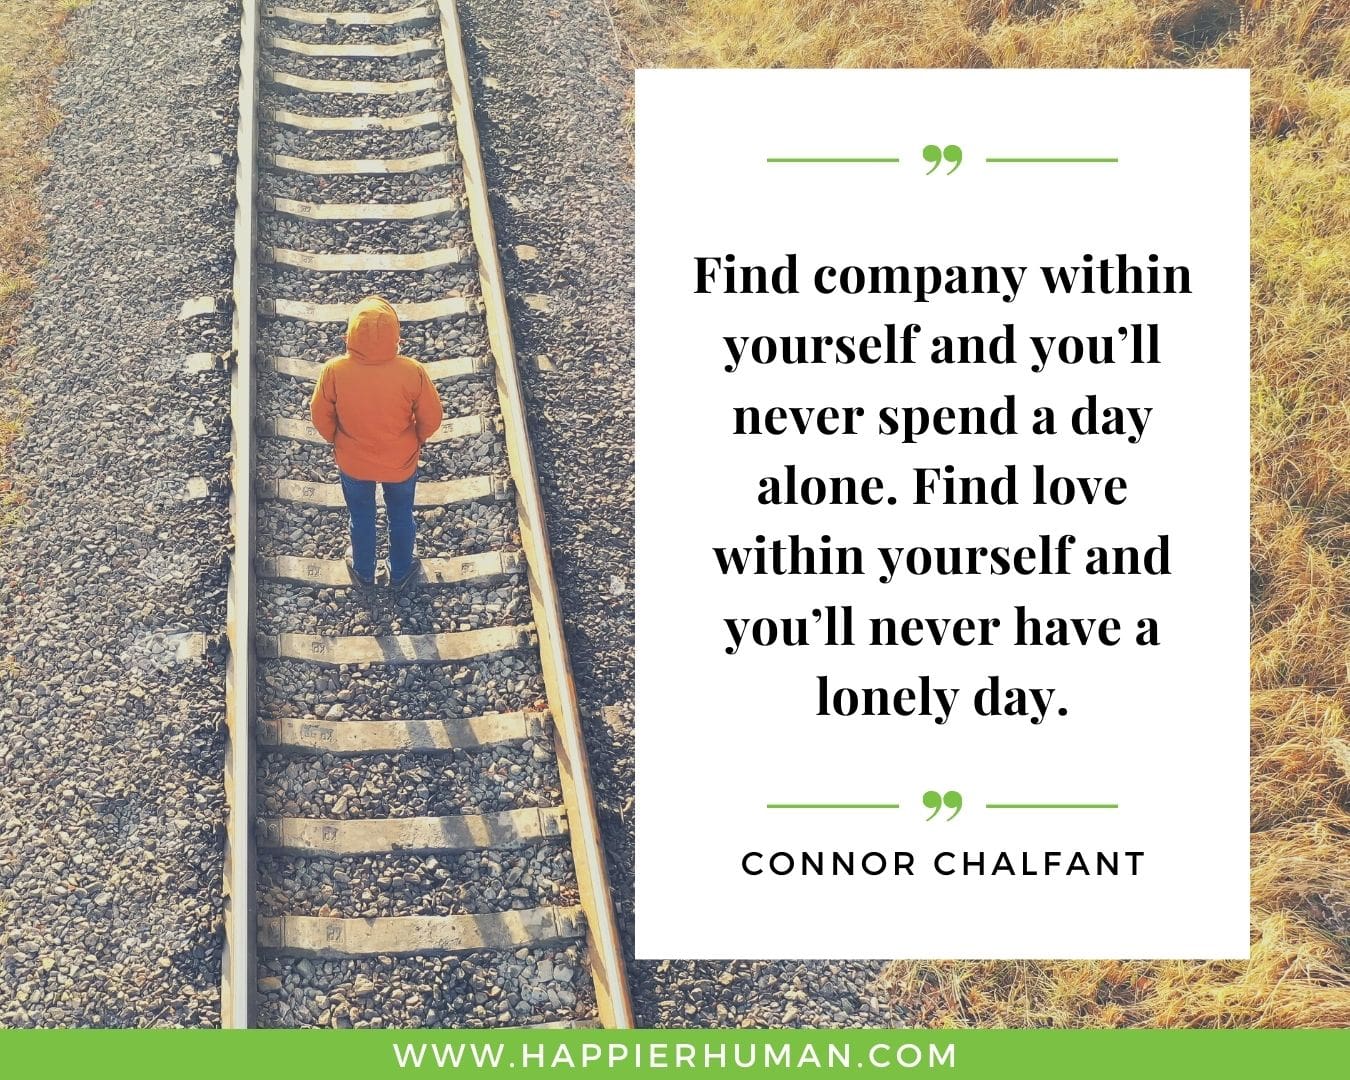 Loneliness Quotes - “Find company within yourself and you’ll never spend a day alone. Find love within yourself and you’ll never have a lonely day.” – Connor Chalfant